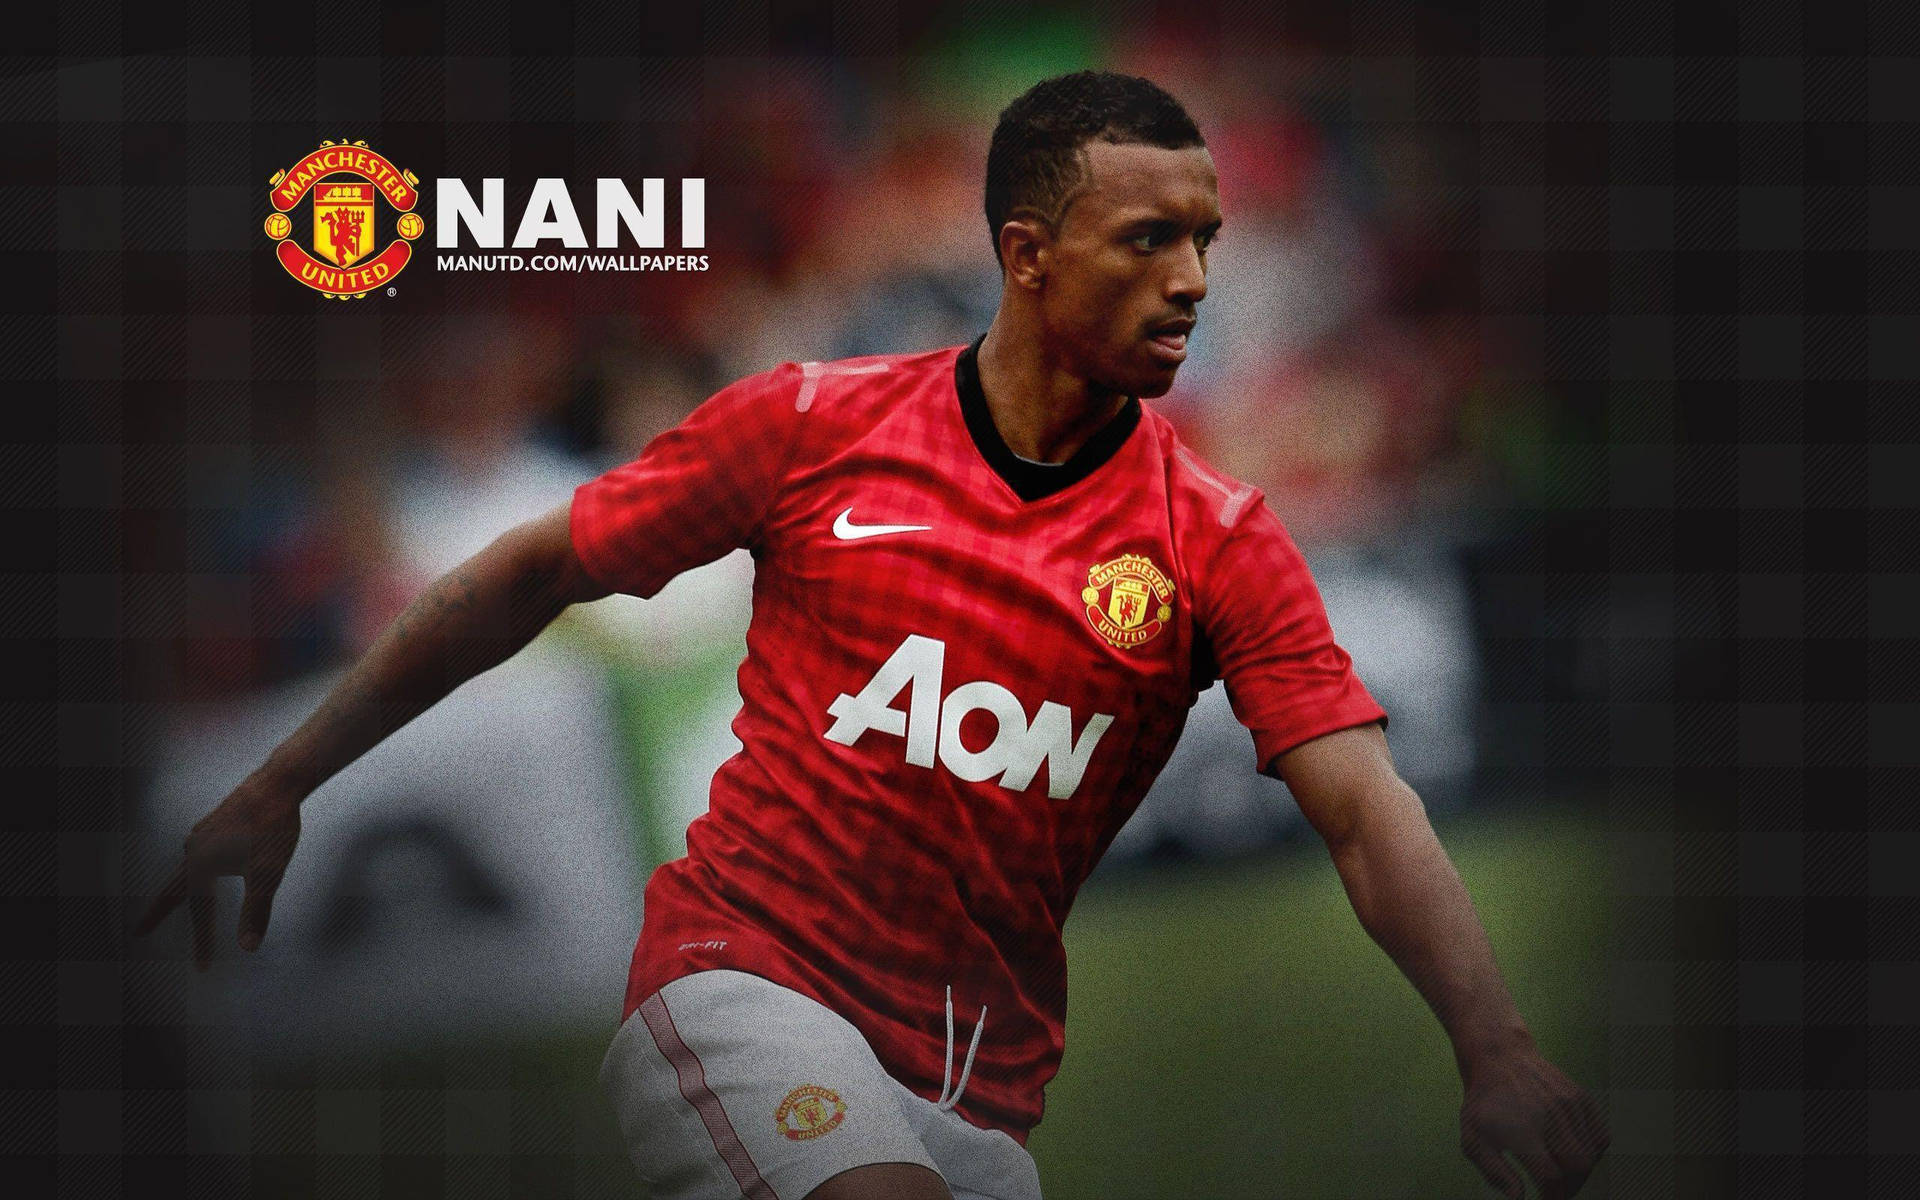 Manchester United Players Feature: Nani Wallpaper